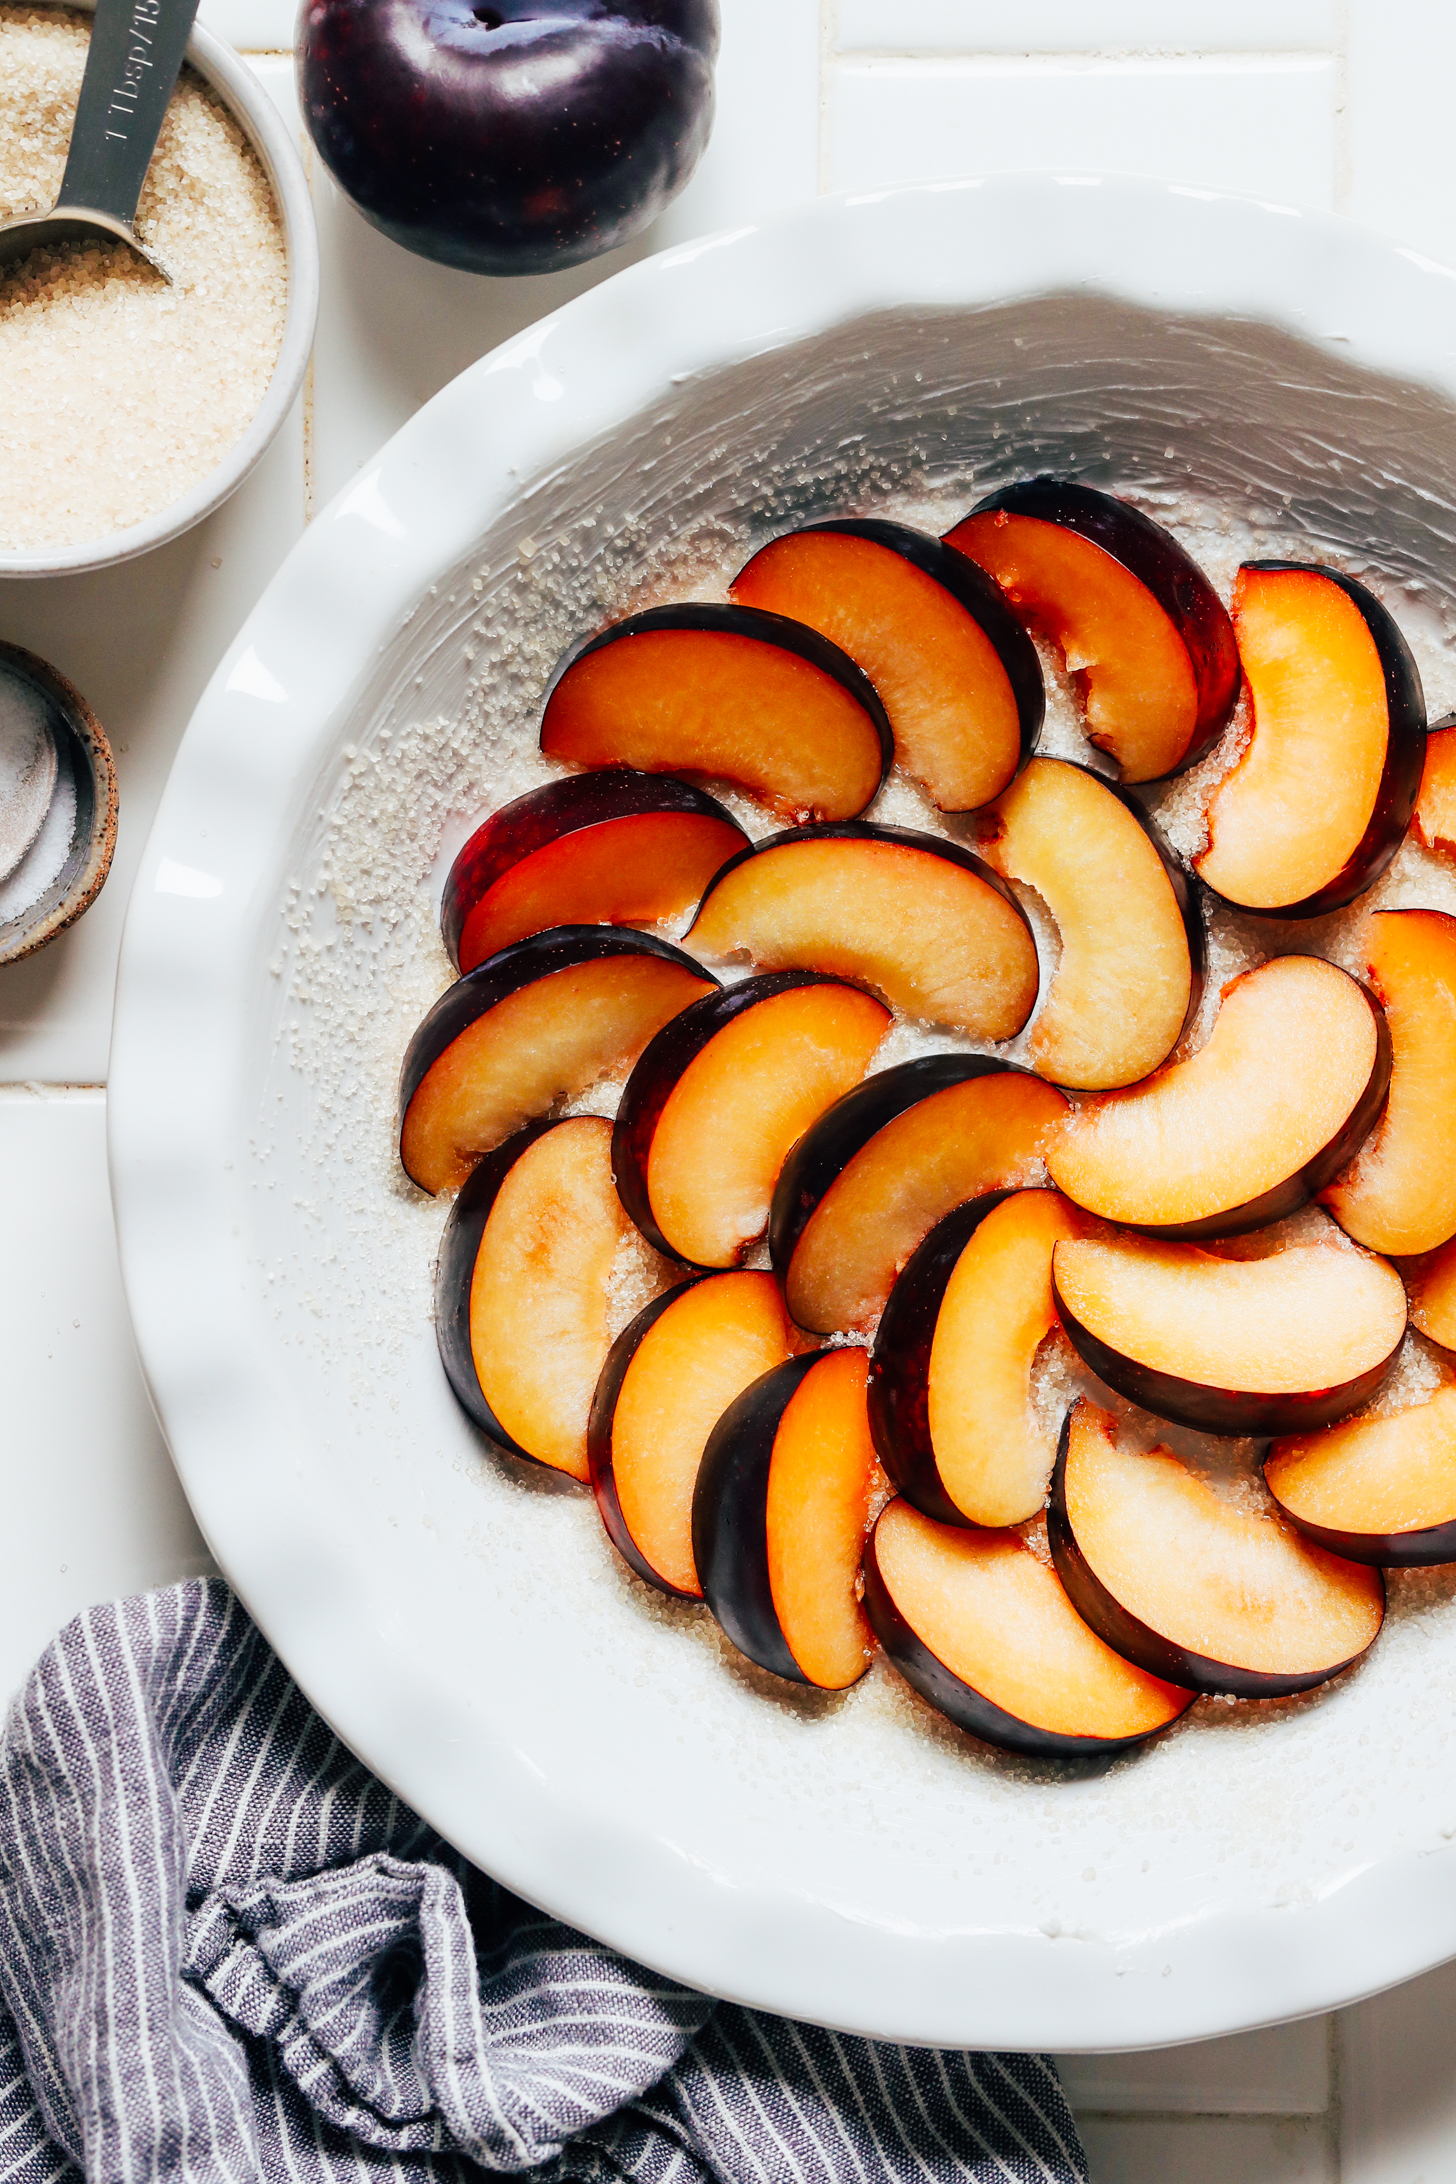 Sliced plums arranged in a circular pattern in a pie pan